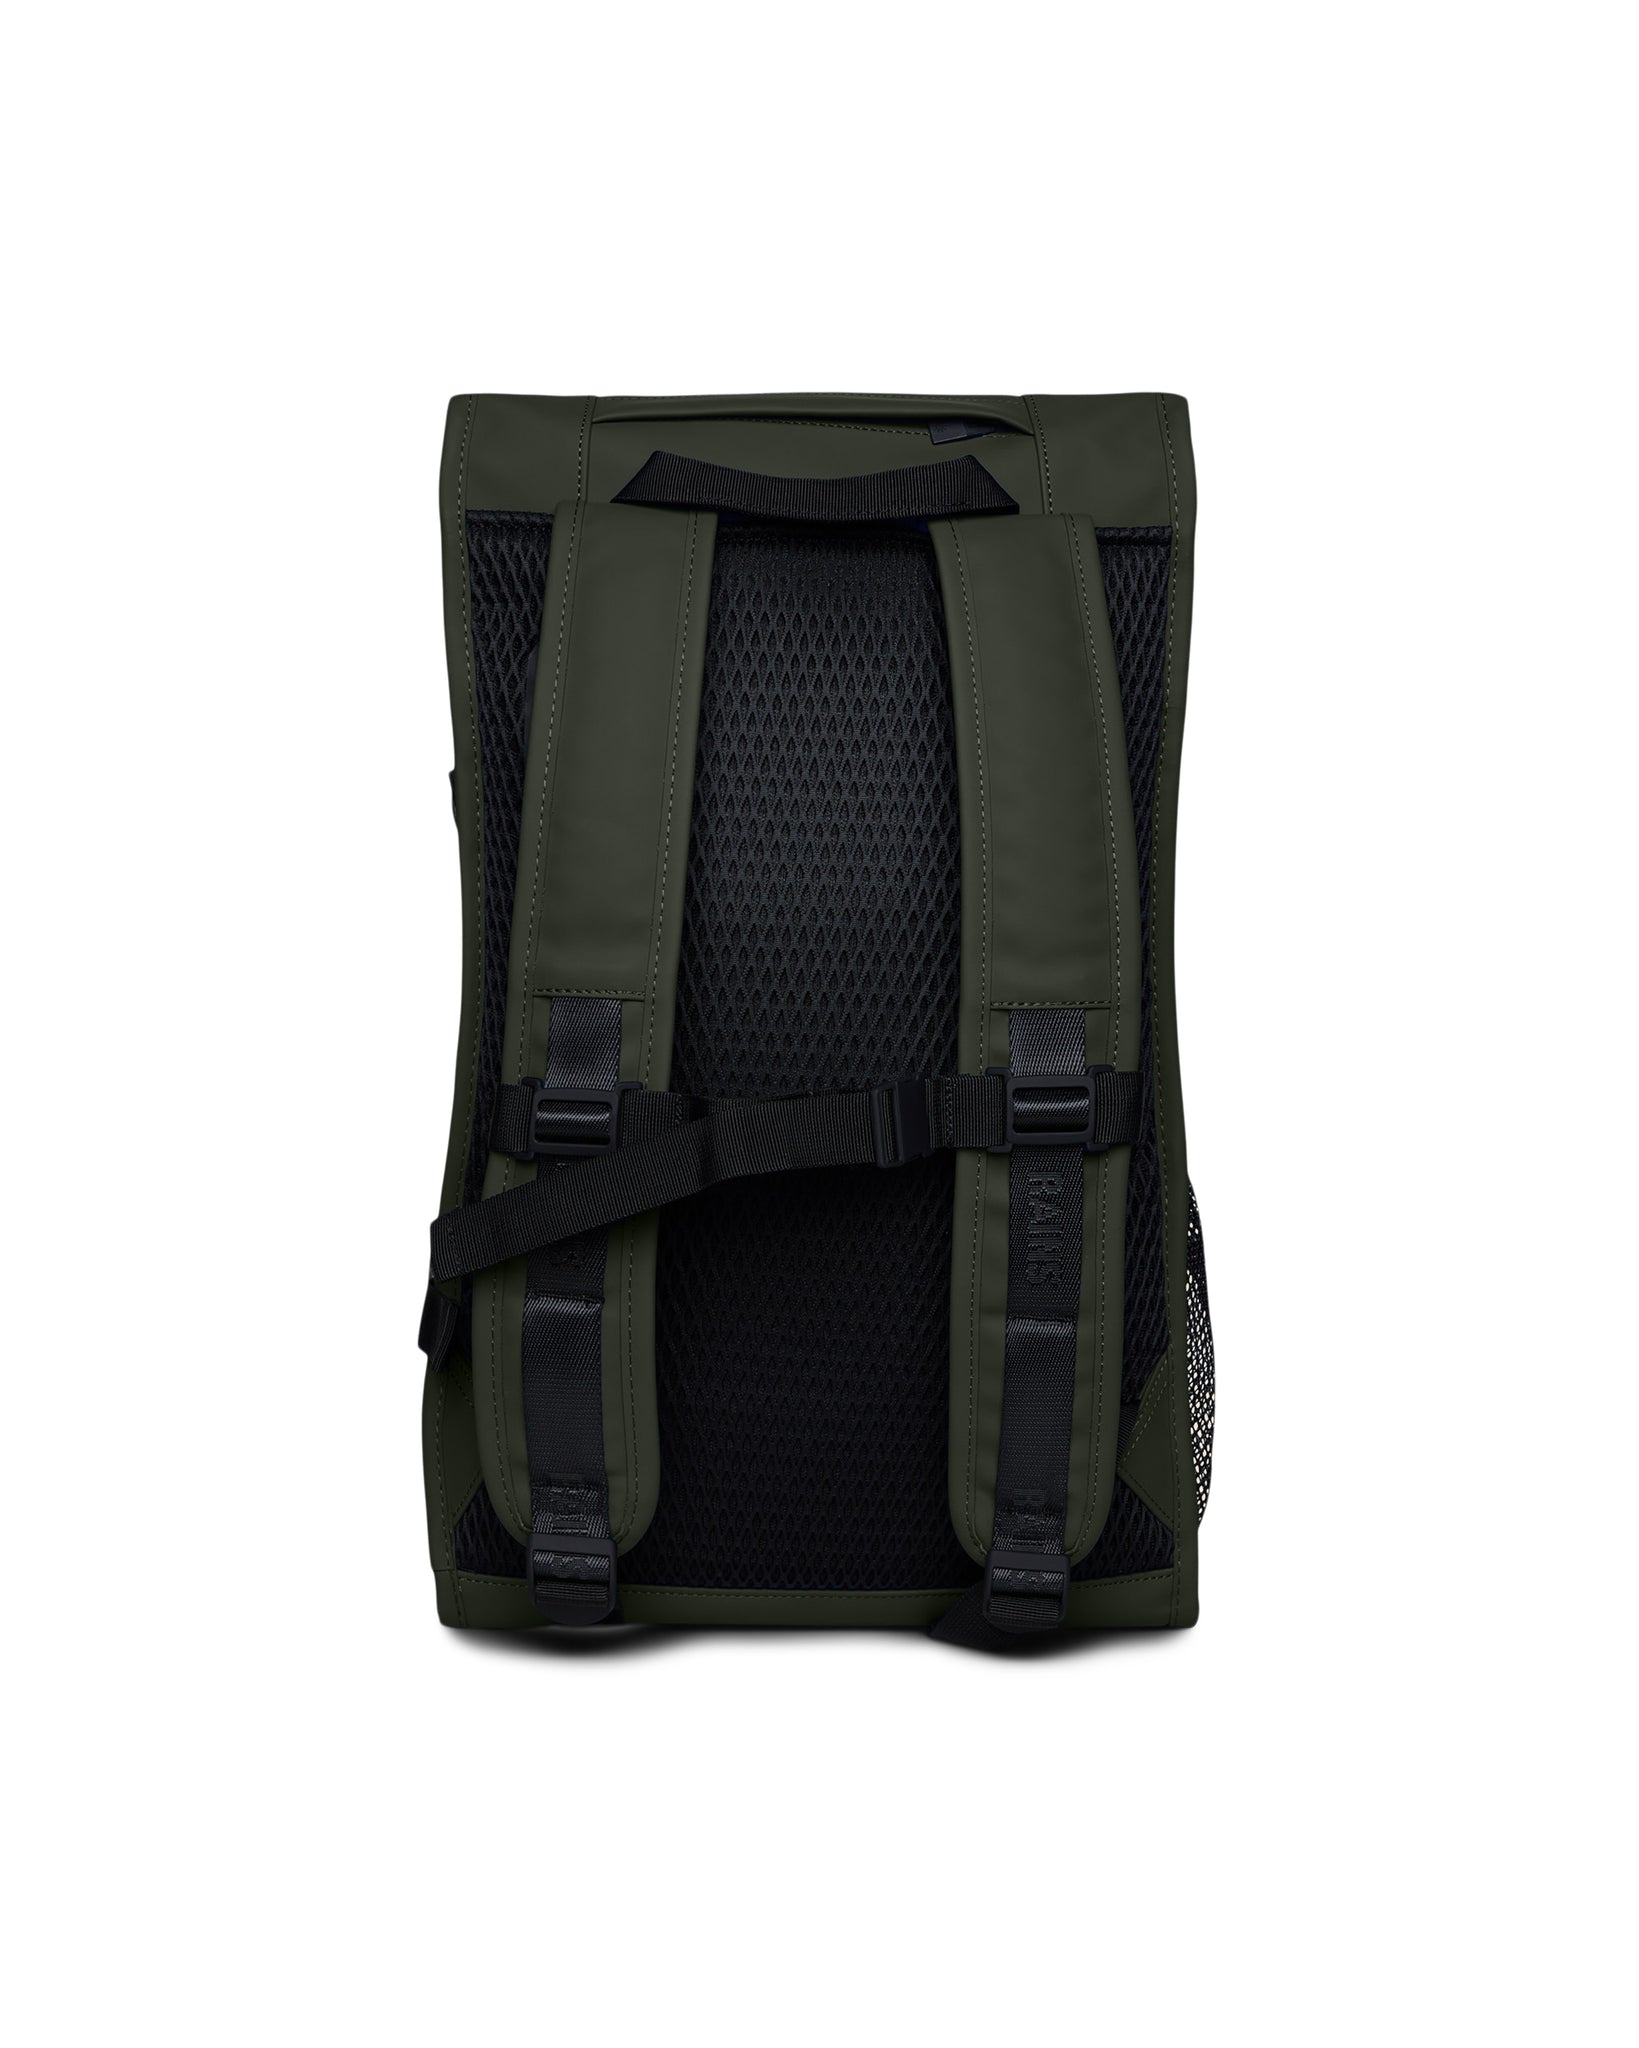 Trail Mountaineer Bag Backpack - Green